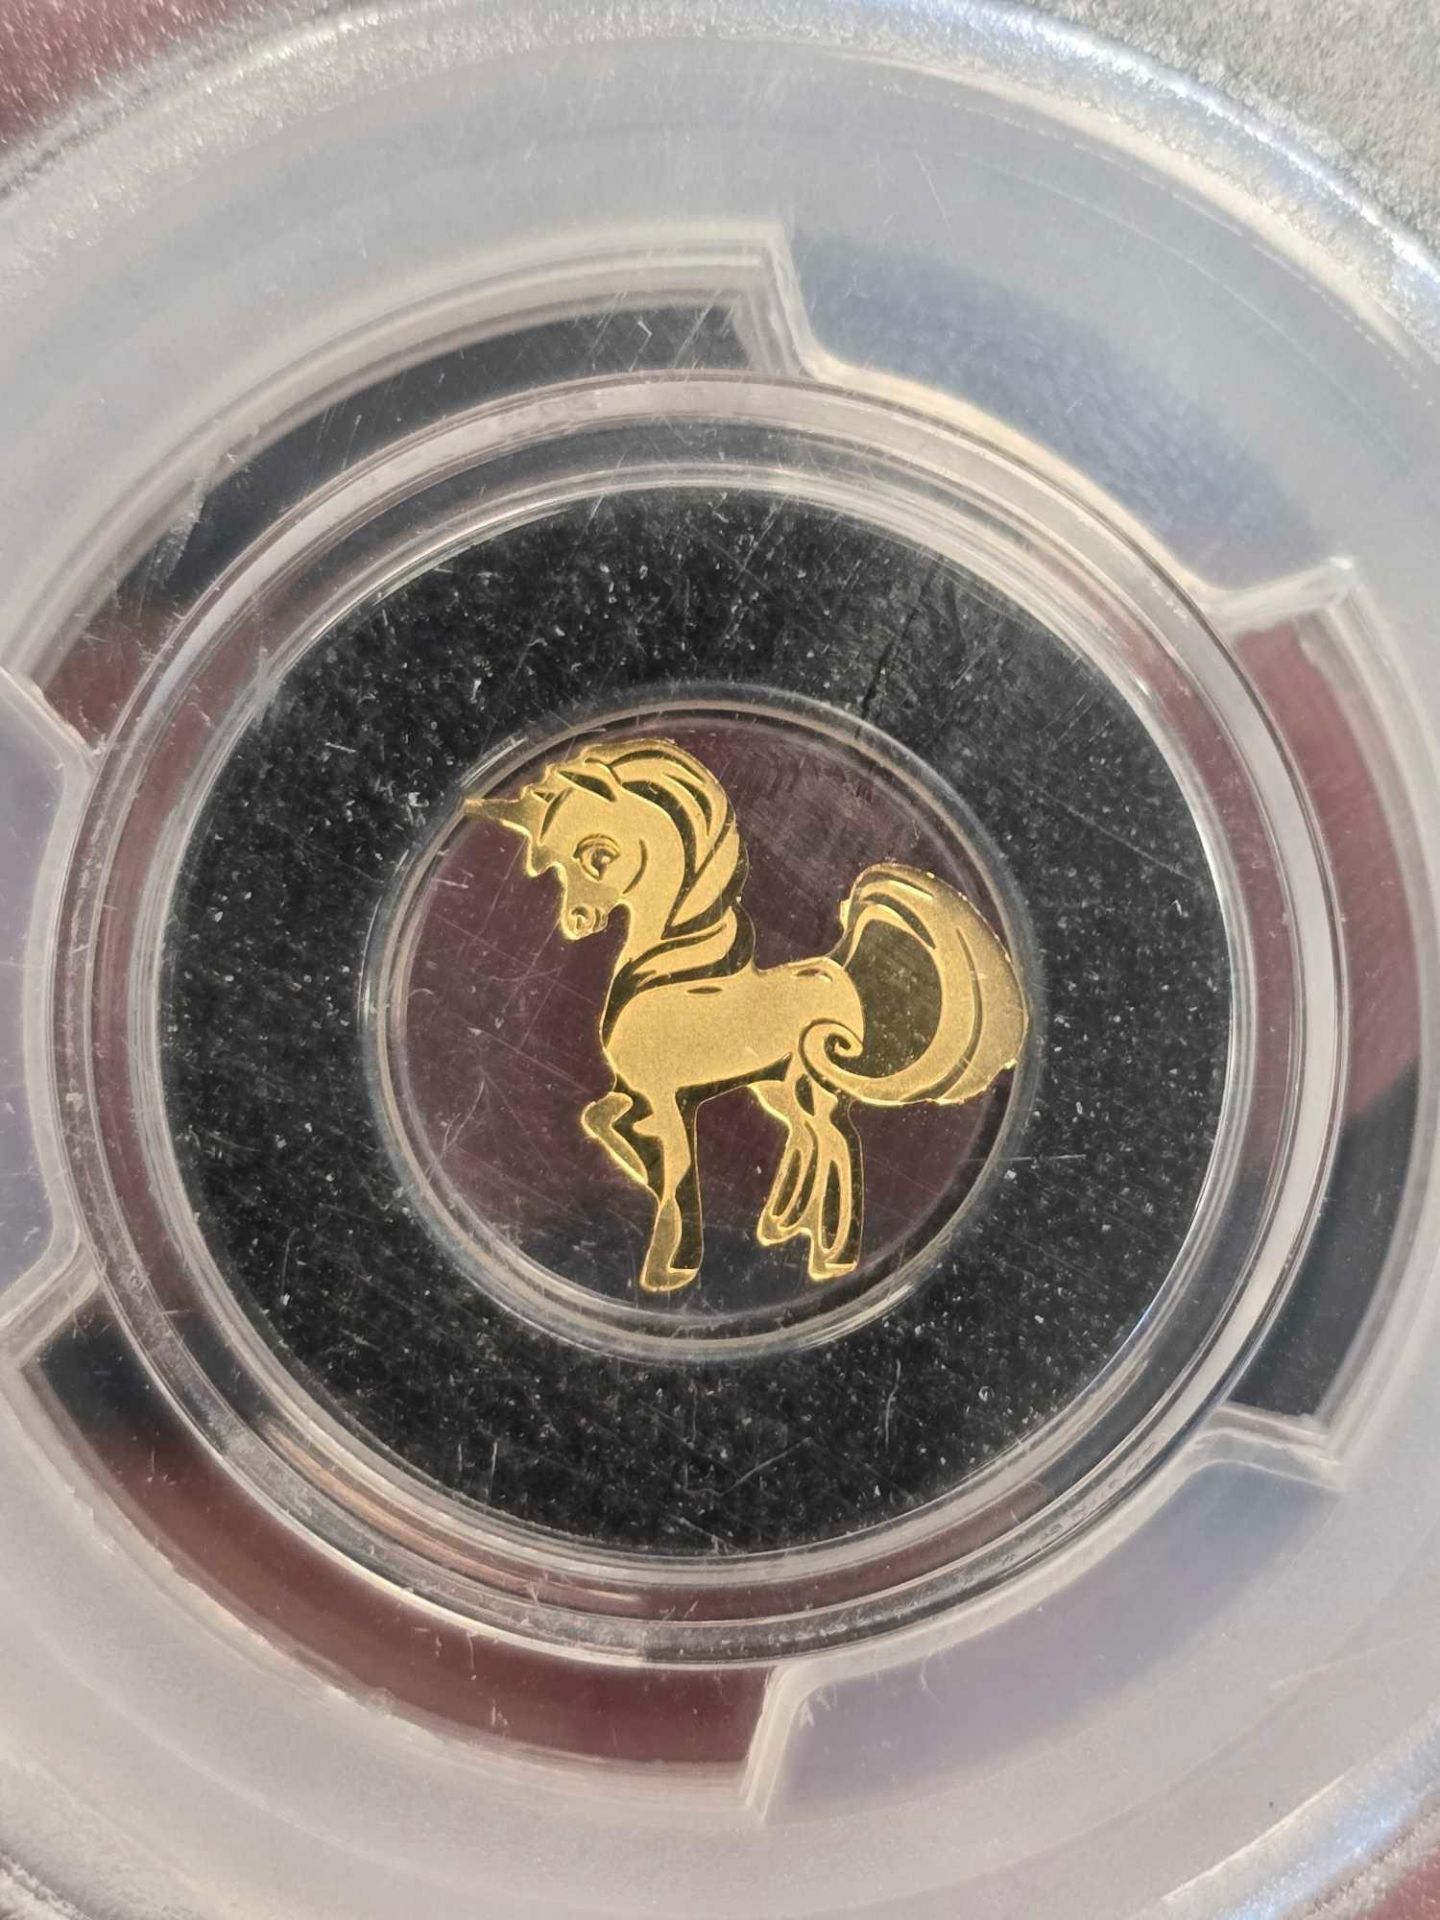 2018 Gold Palau Sweetest Unicorn Figural $1 Coin PCGS MS70 1st Day SINGLE FINEST - Image 5 of 5